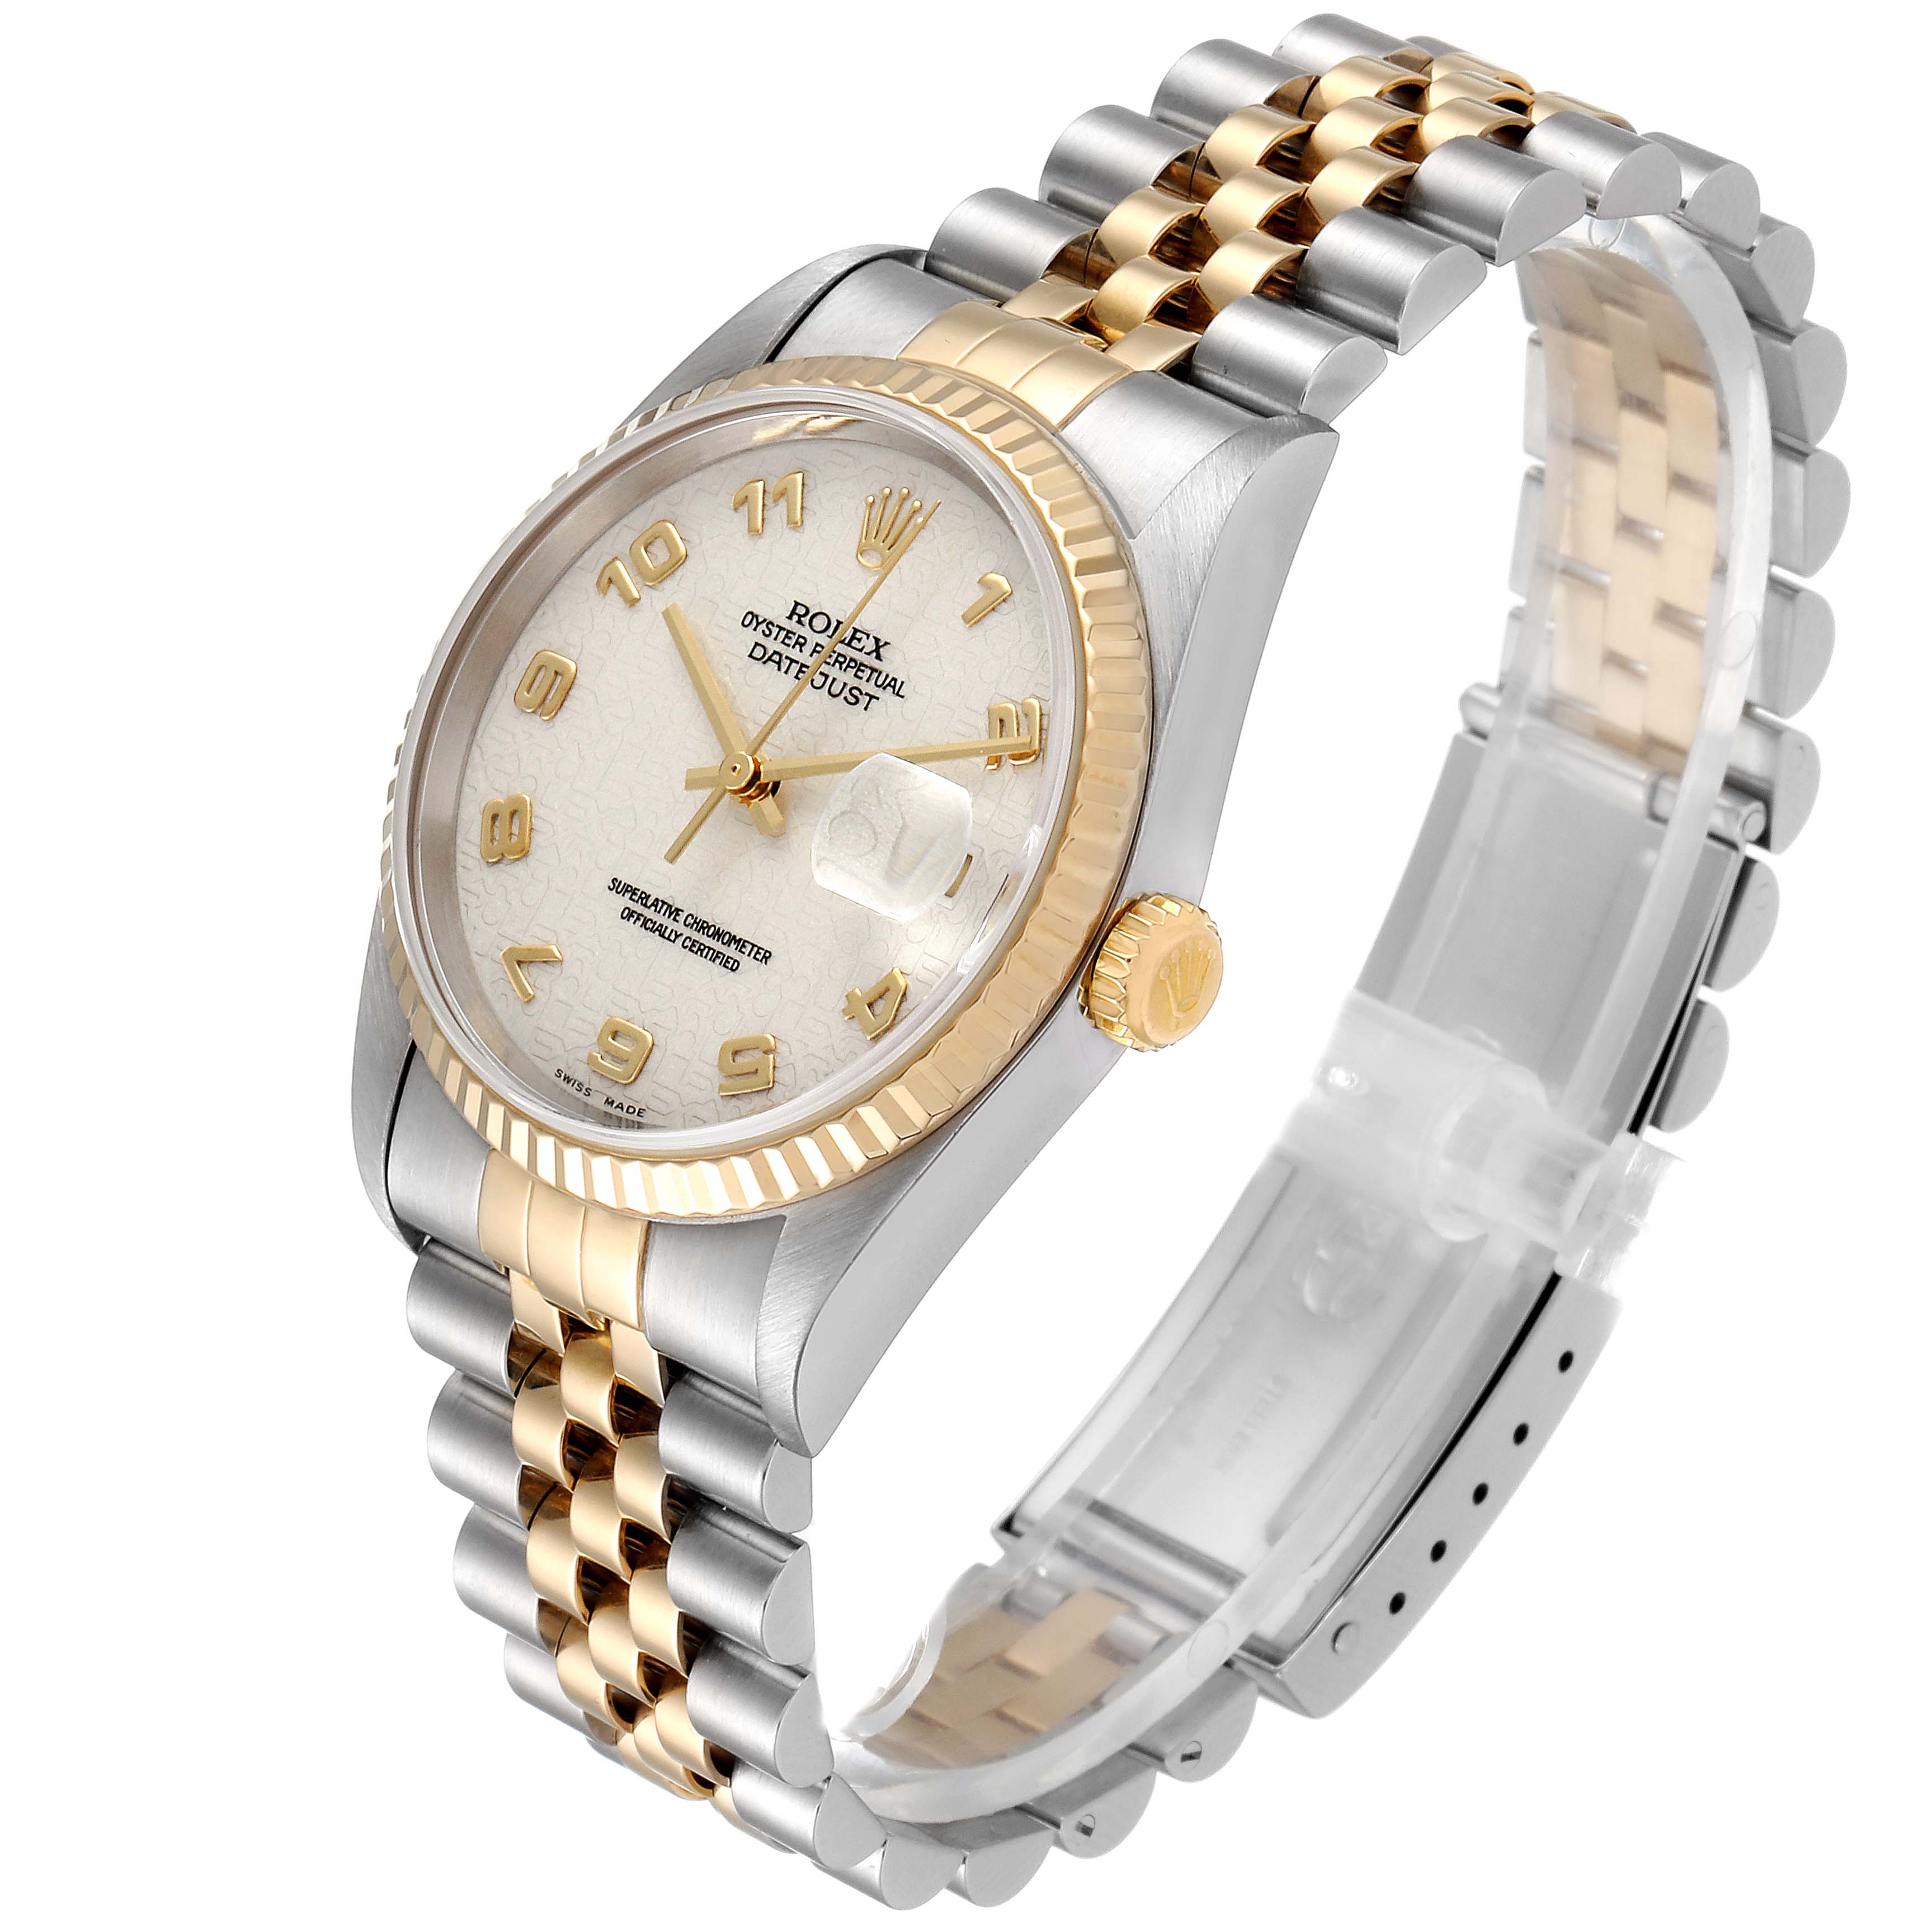 Rolex Datejust Steel 18K Yellow Gold Mens Watch 16233 Box Papers ...